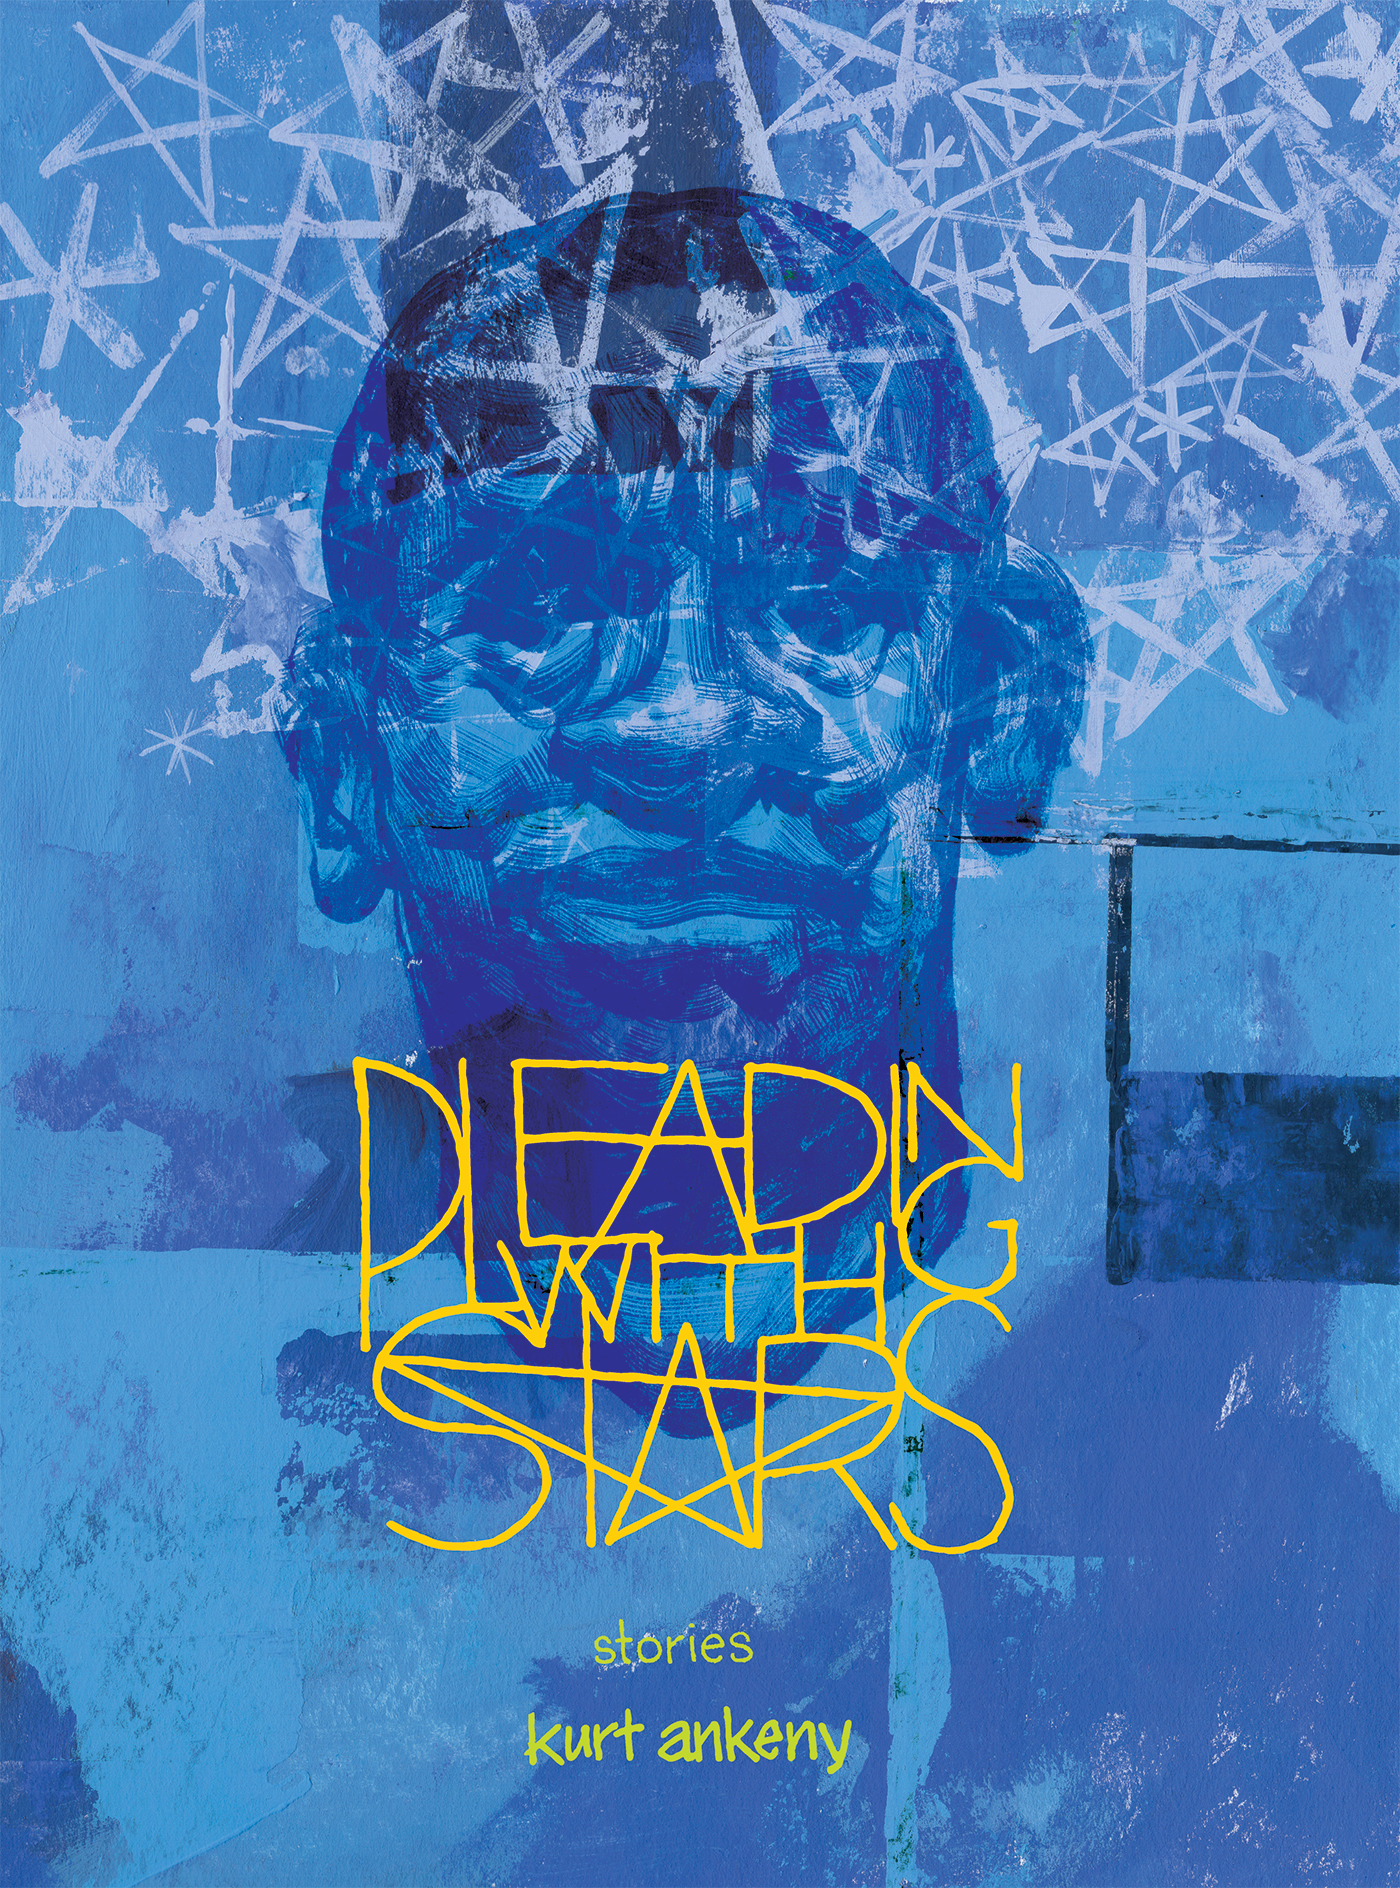 Graphic novel cover image featuring the head of a man of African descent in front of an abstract blue field with stylized stars.